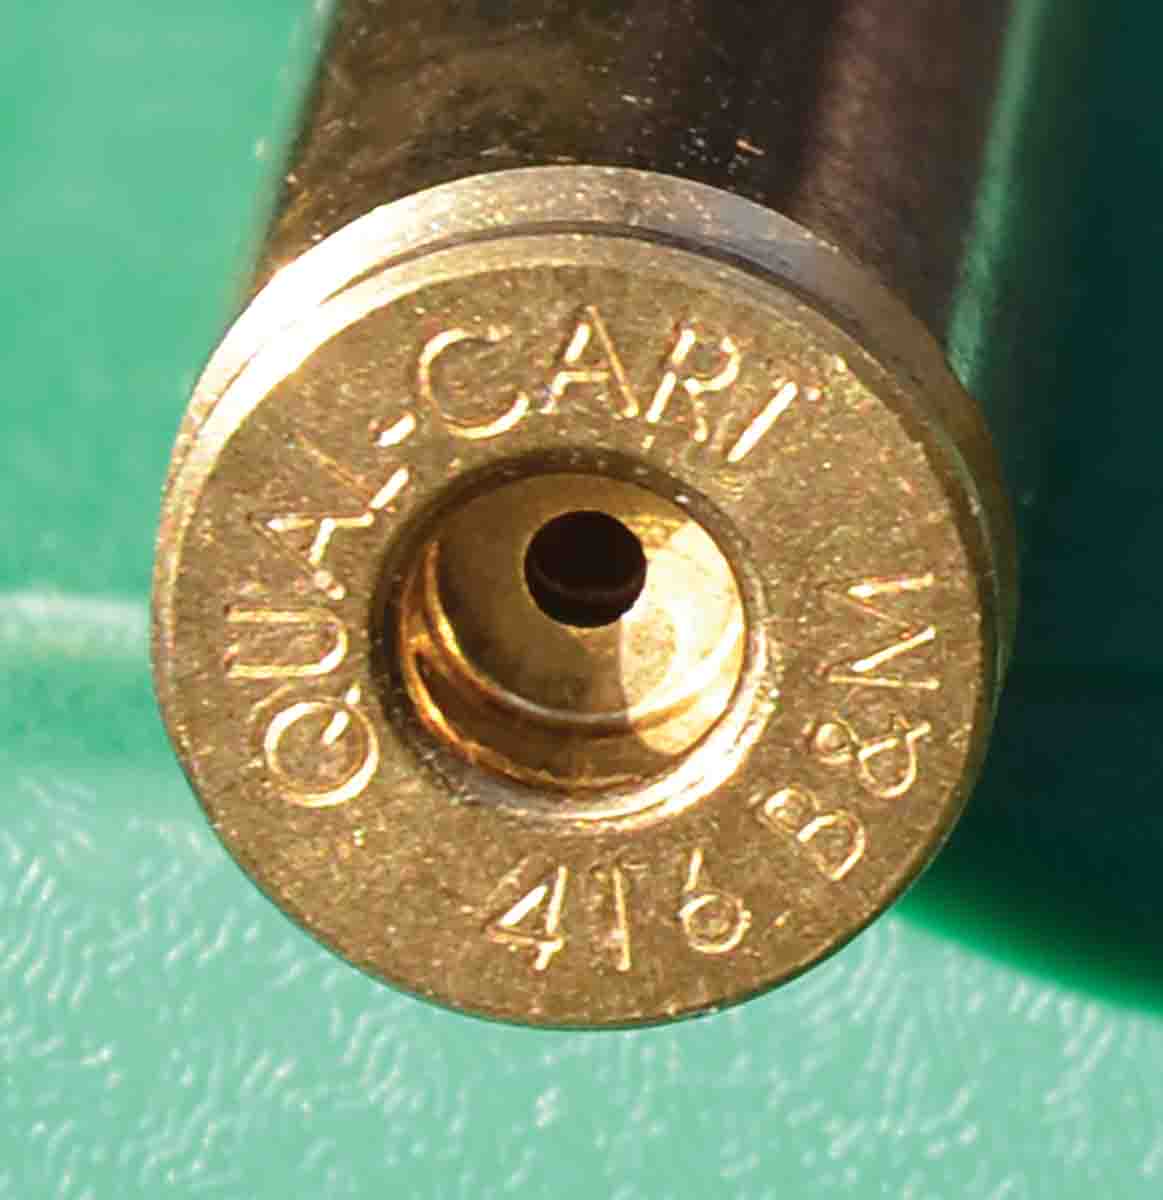 For handloaders who are not into case forming, Quality Cartridge offers .416 B&M brass.